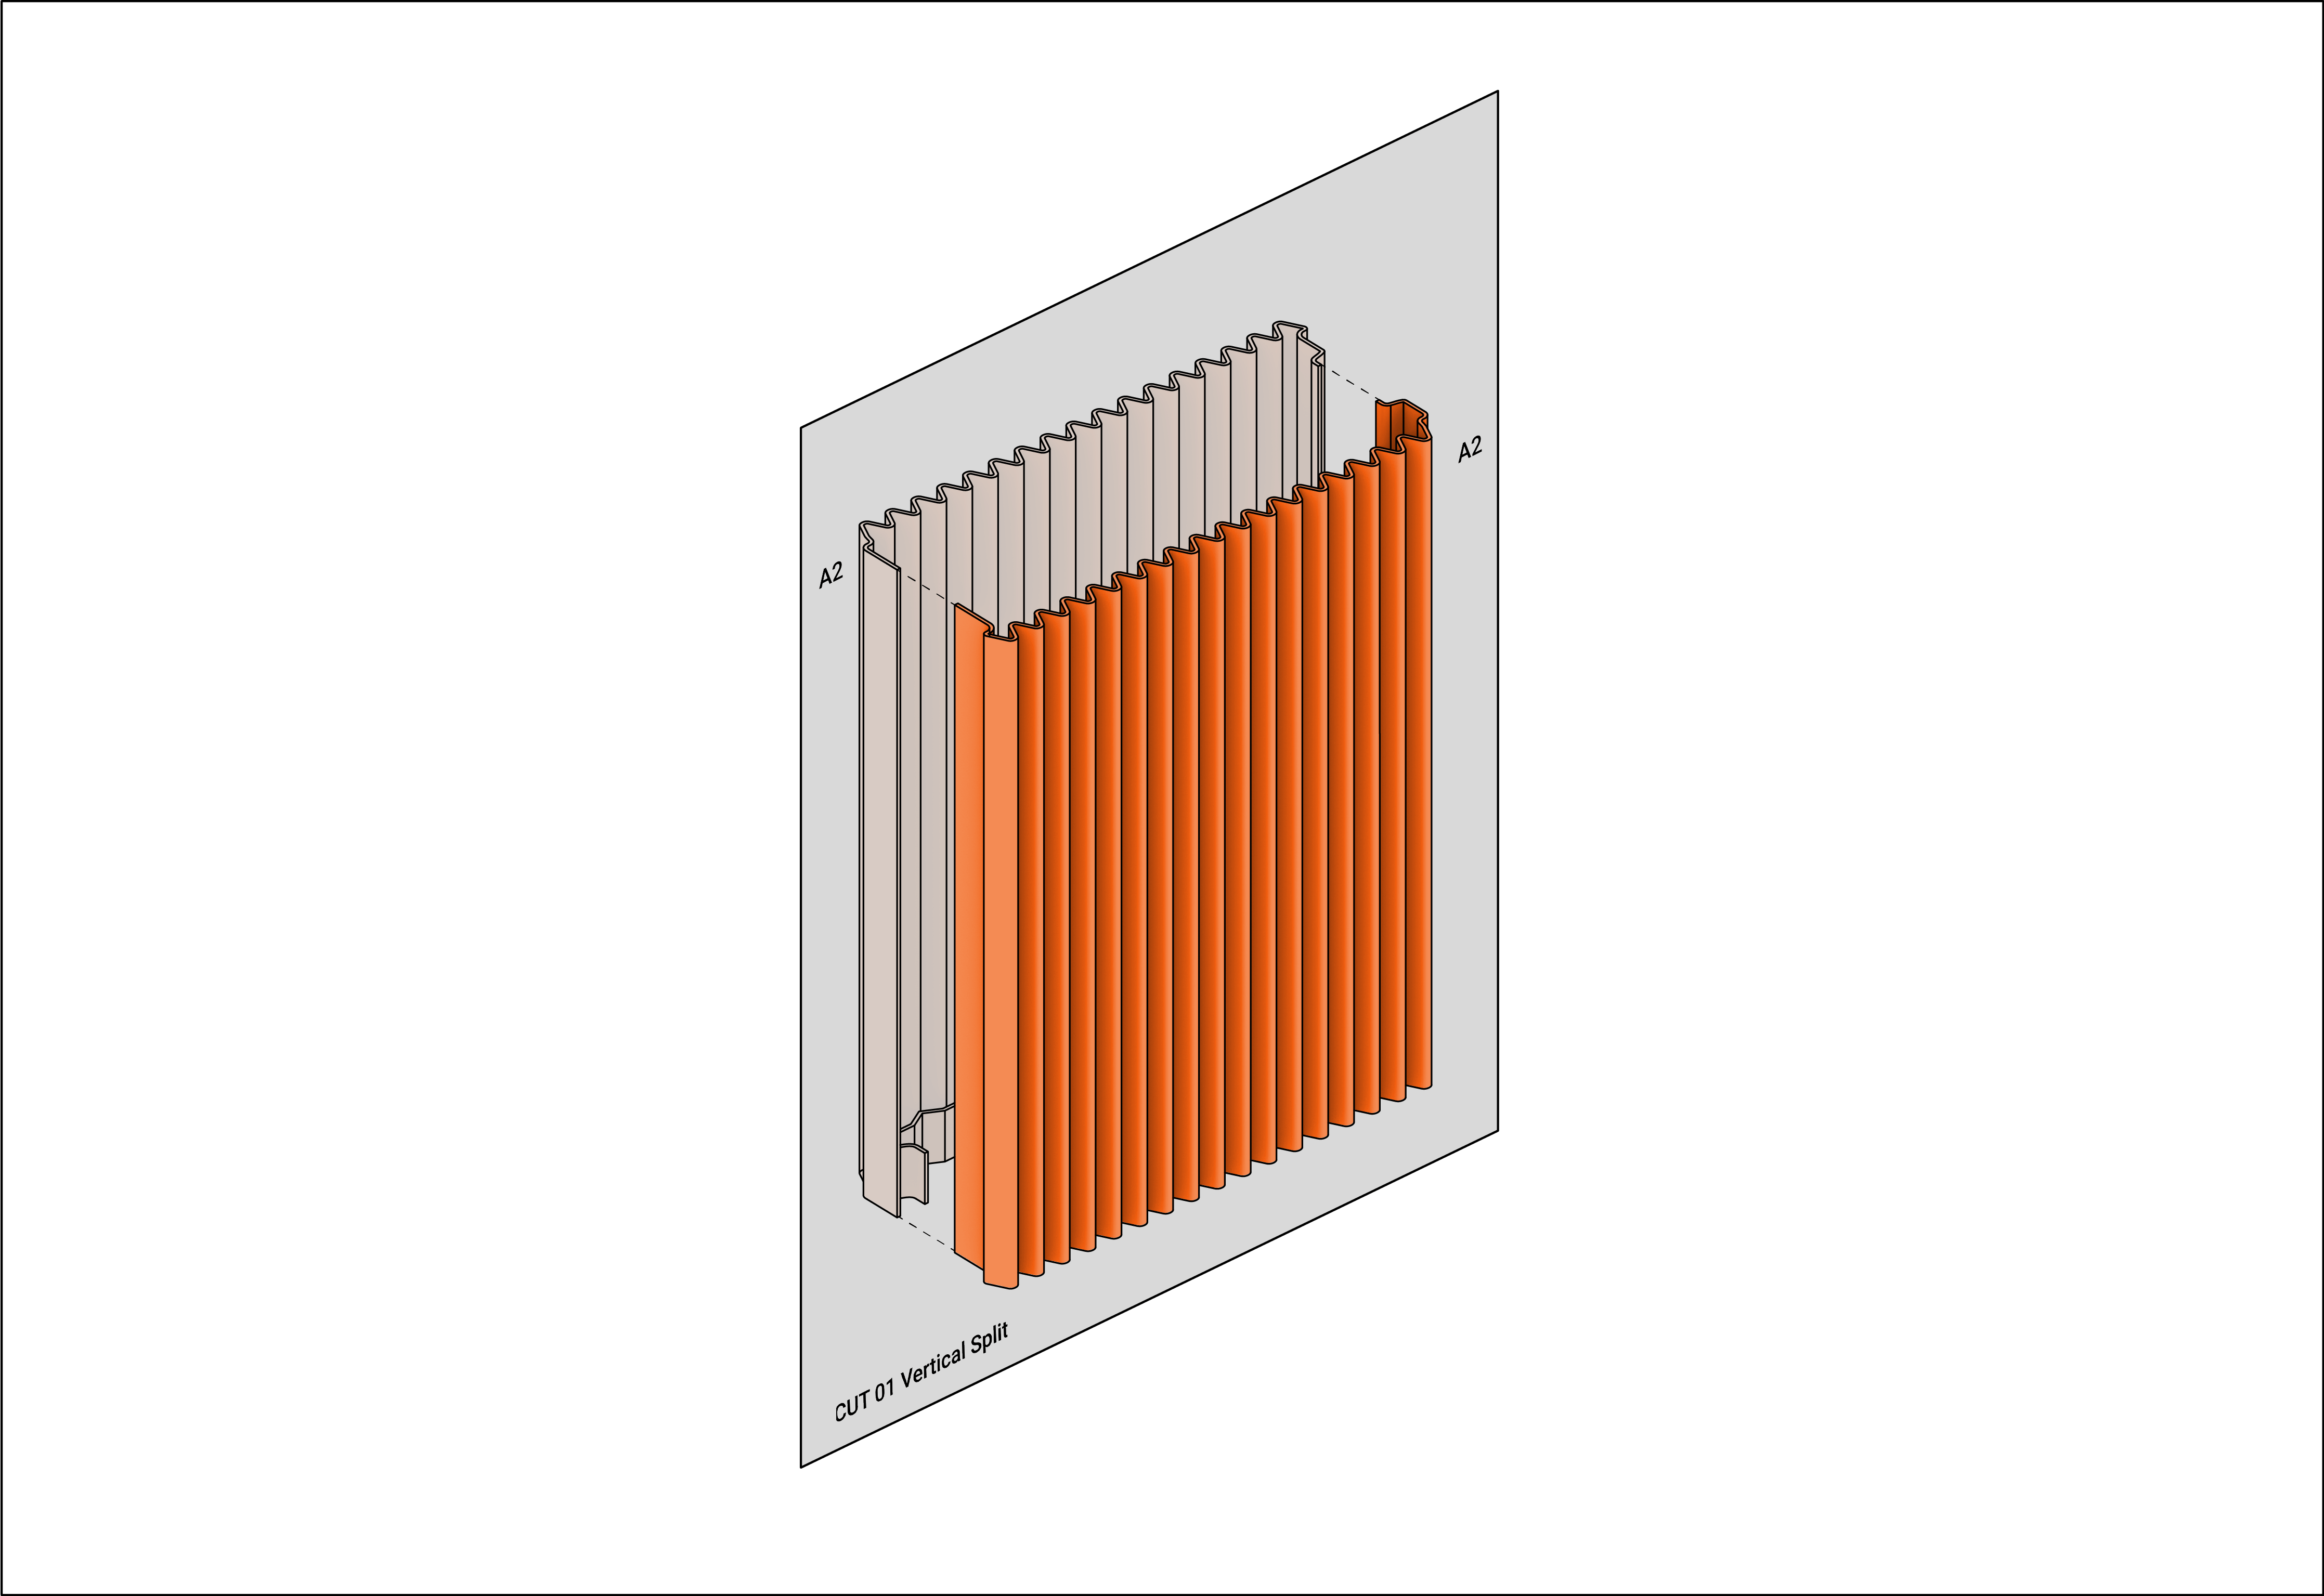 Post processing of a 3D printed module, splitting vertically to obtain 2 panels.